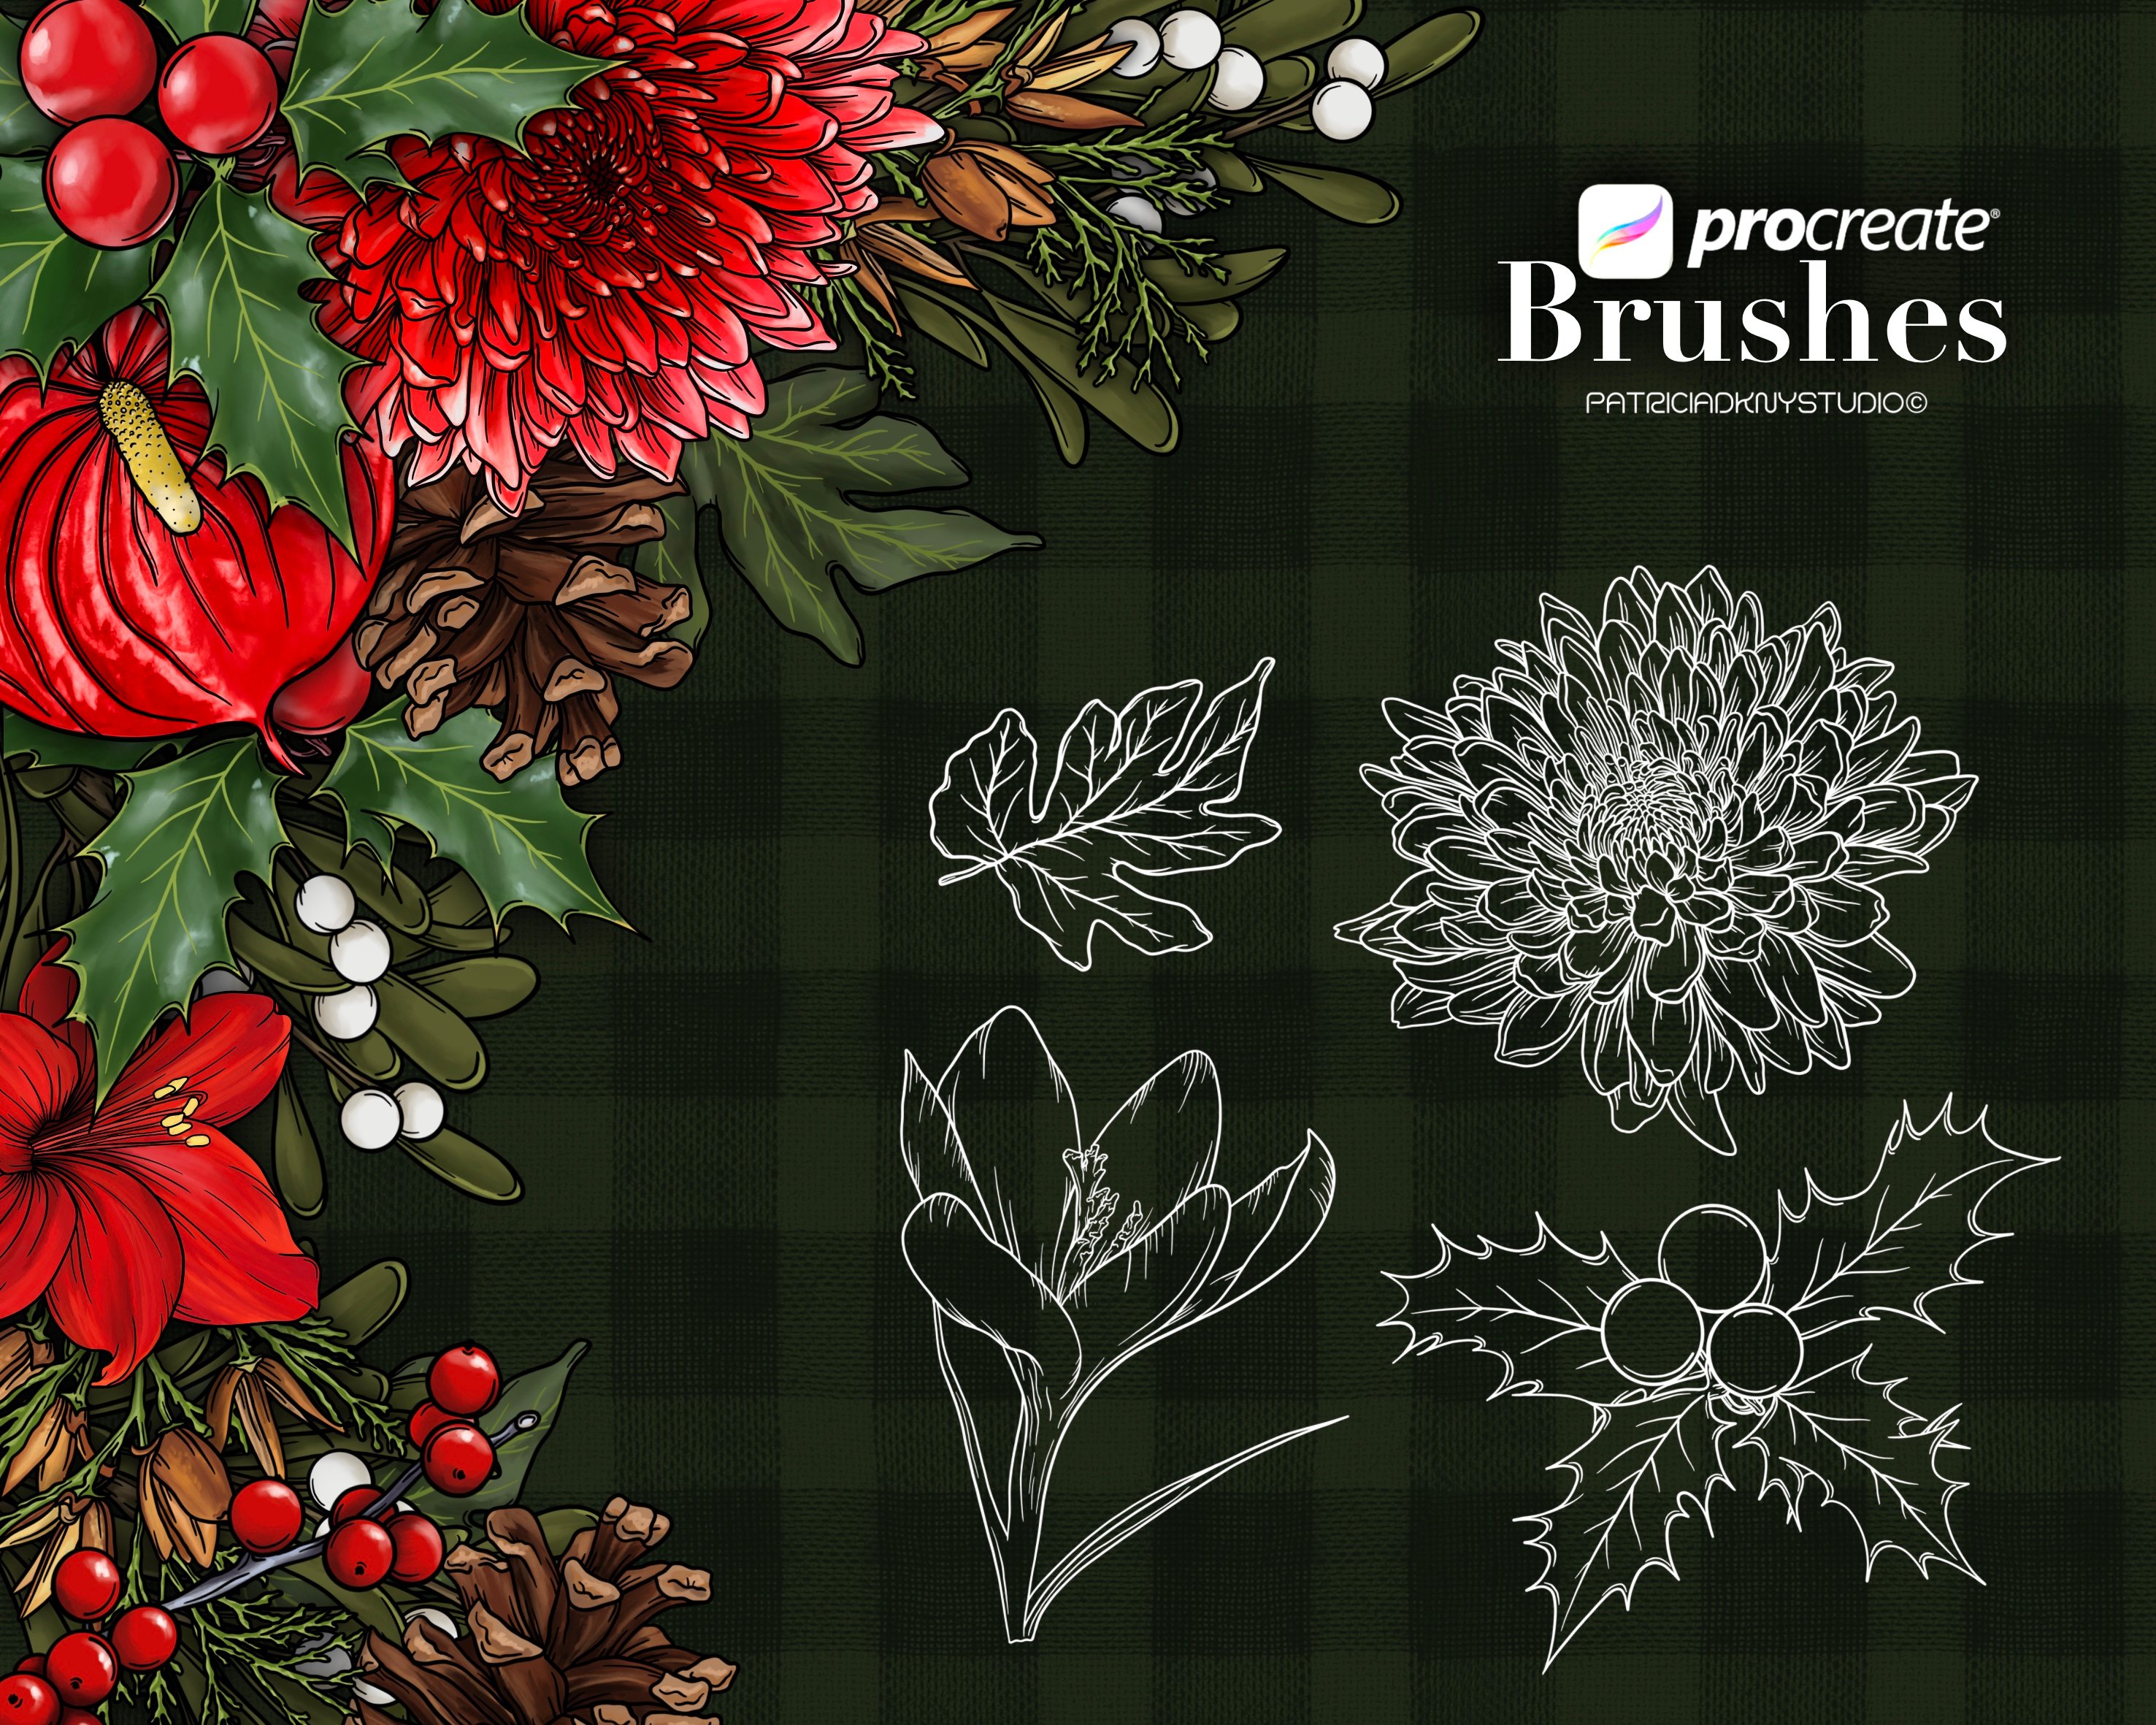 65 Procreate Floral Stamps Brushes - Design Cuts